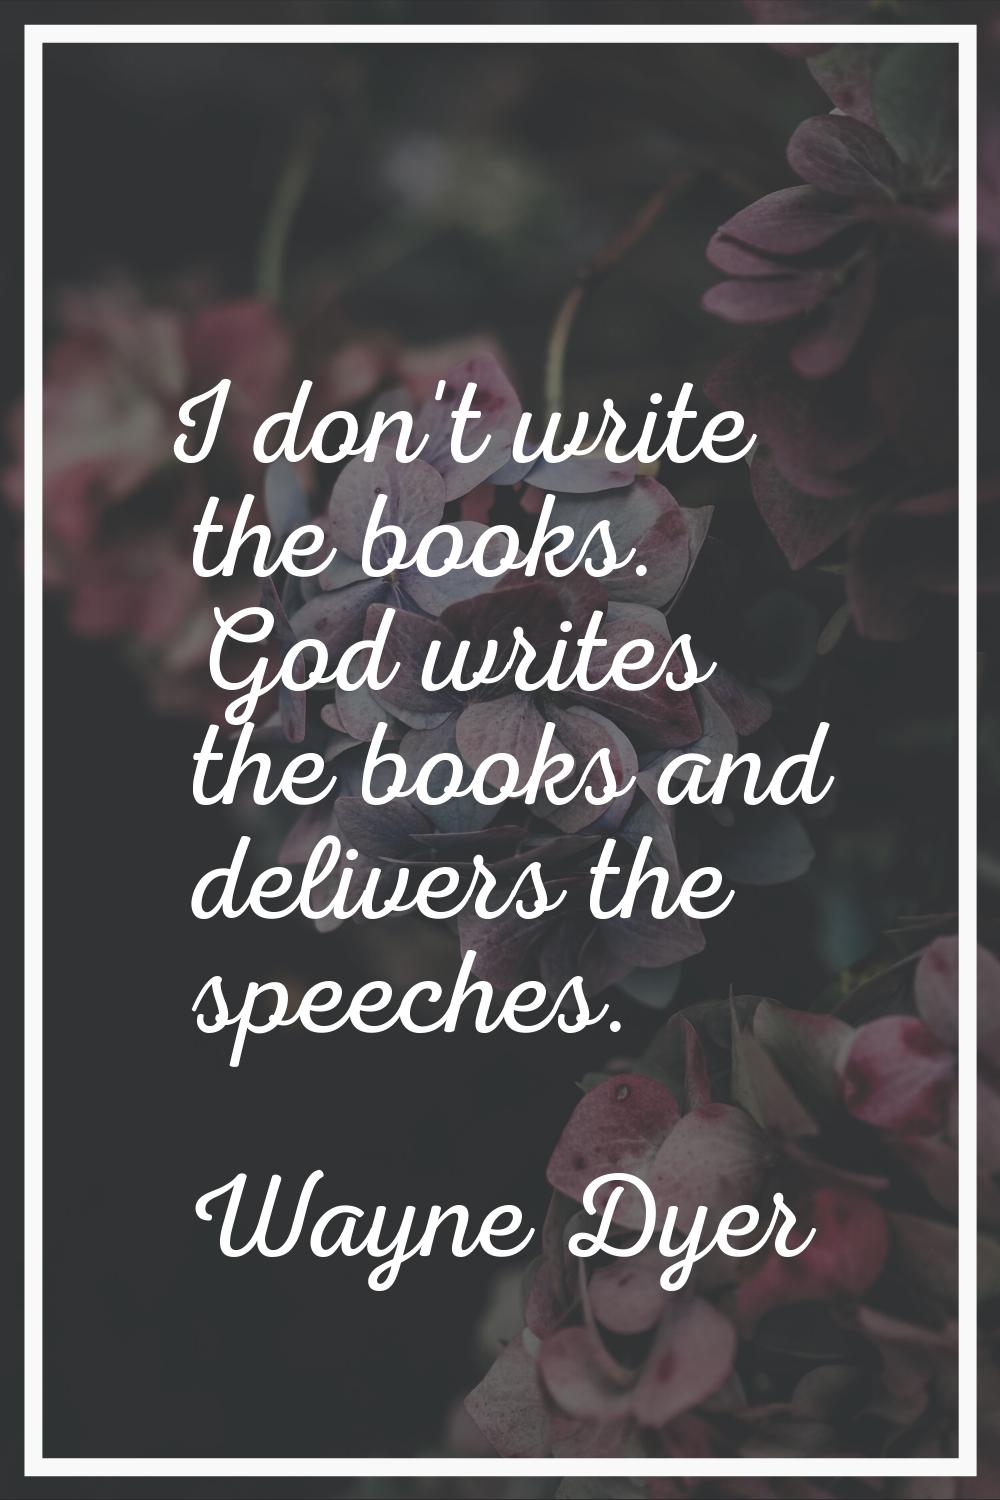 I don't write the books. God writes the books and delivers the speeches.